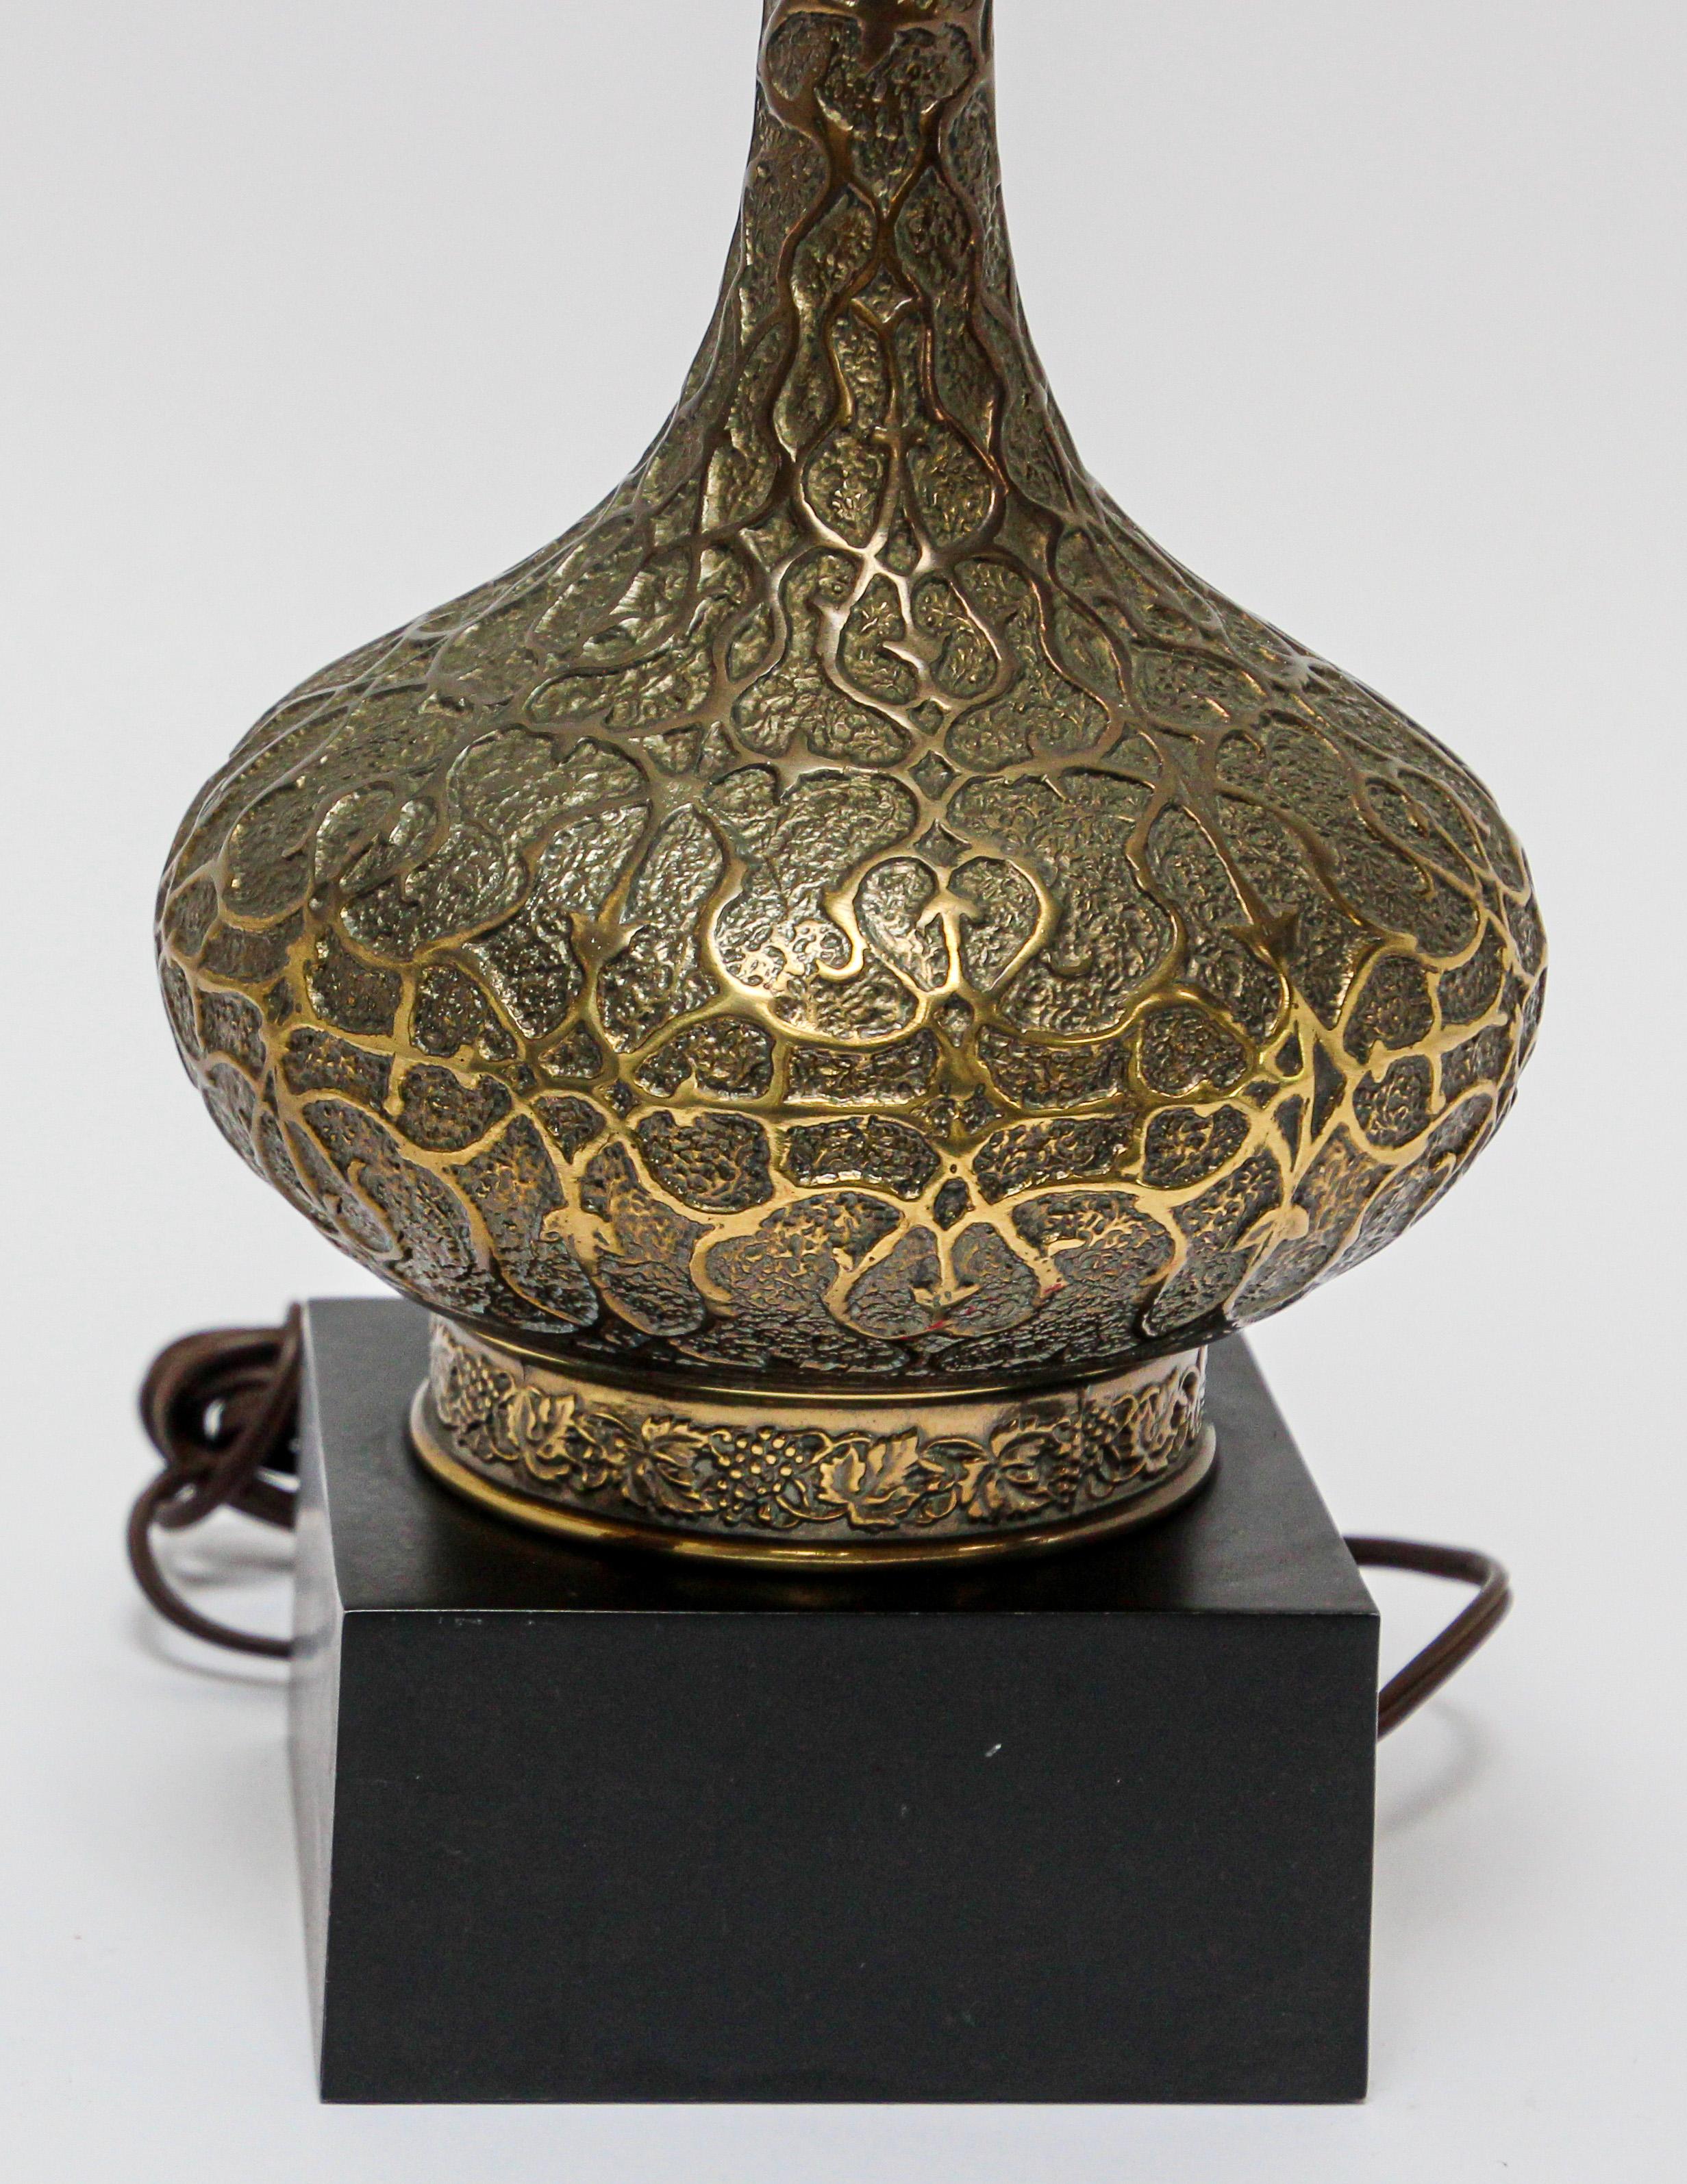 Elegant tall Moorish brass table lamp.
Intricately designed brass onion form with long neck on a square wooden base.
Cast brass with foliages Moorish Arabesque style designs.
Base is: 5